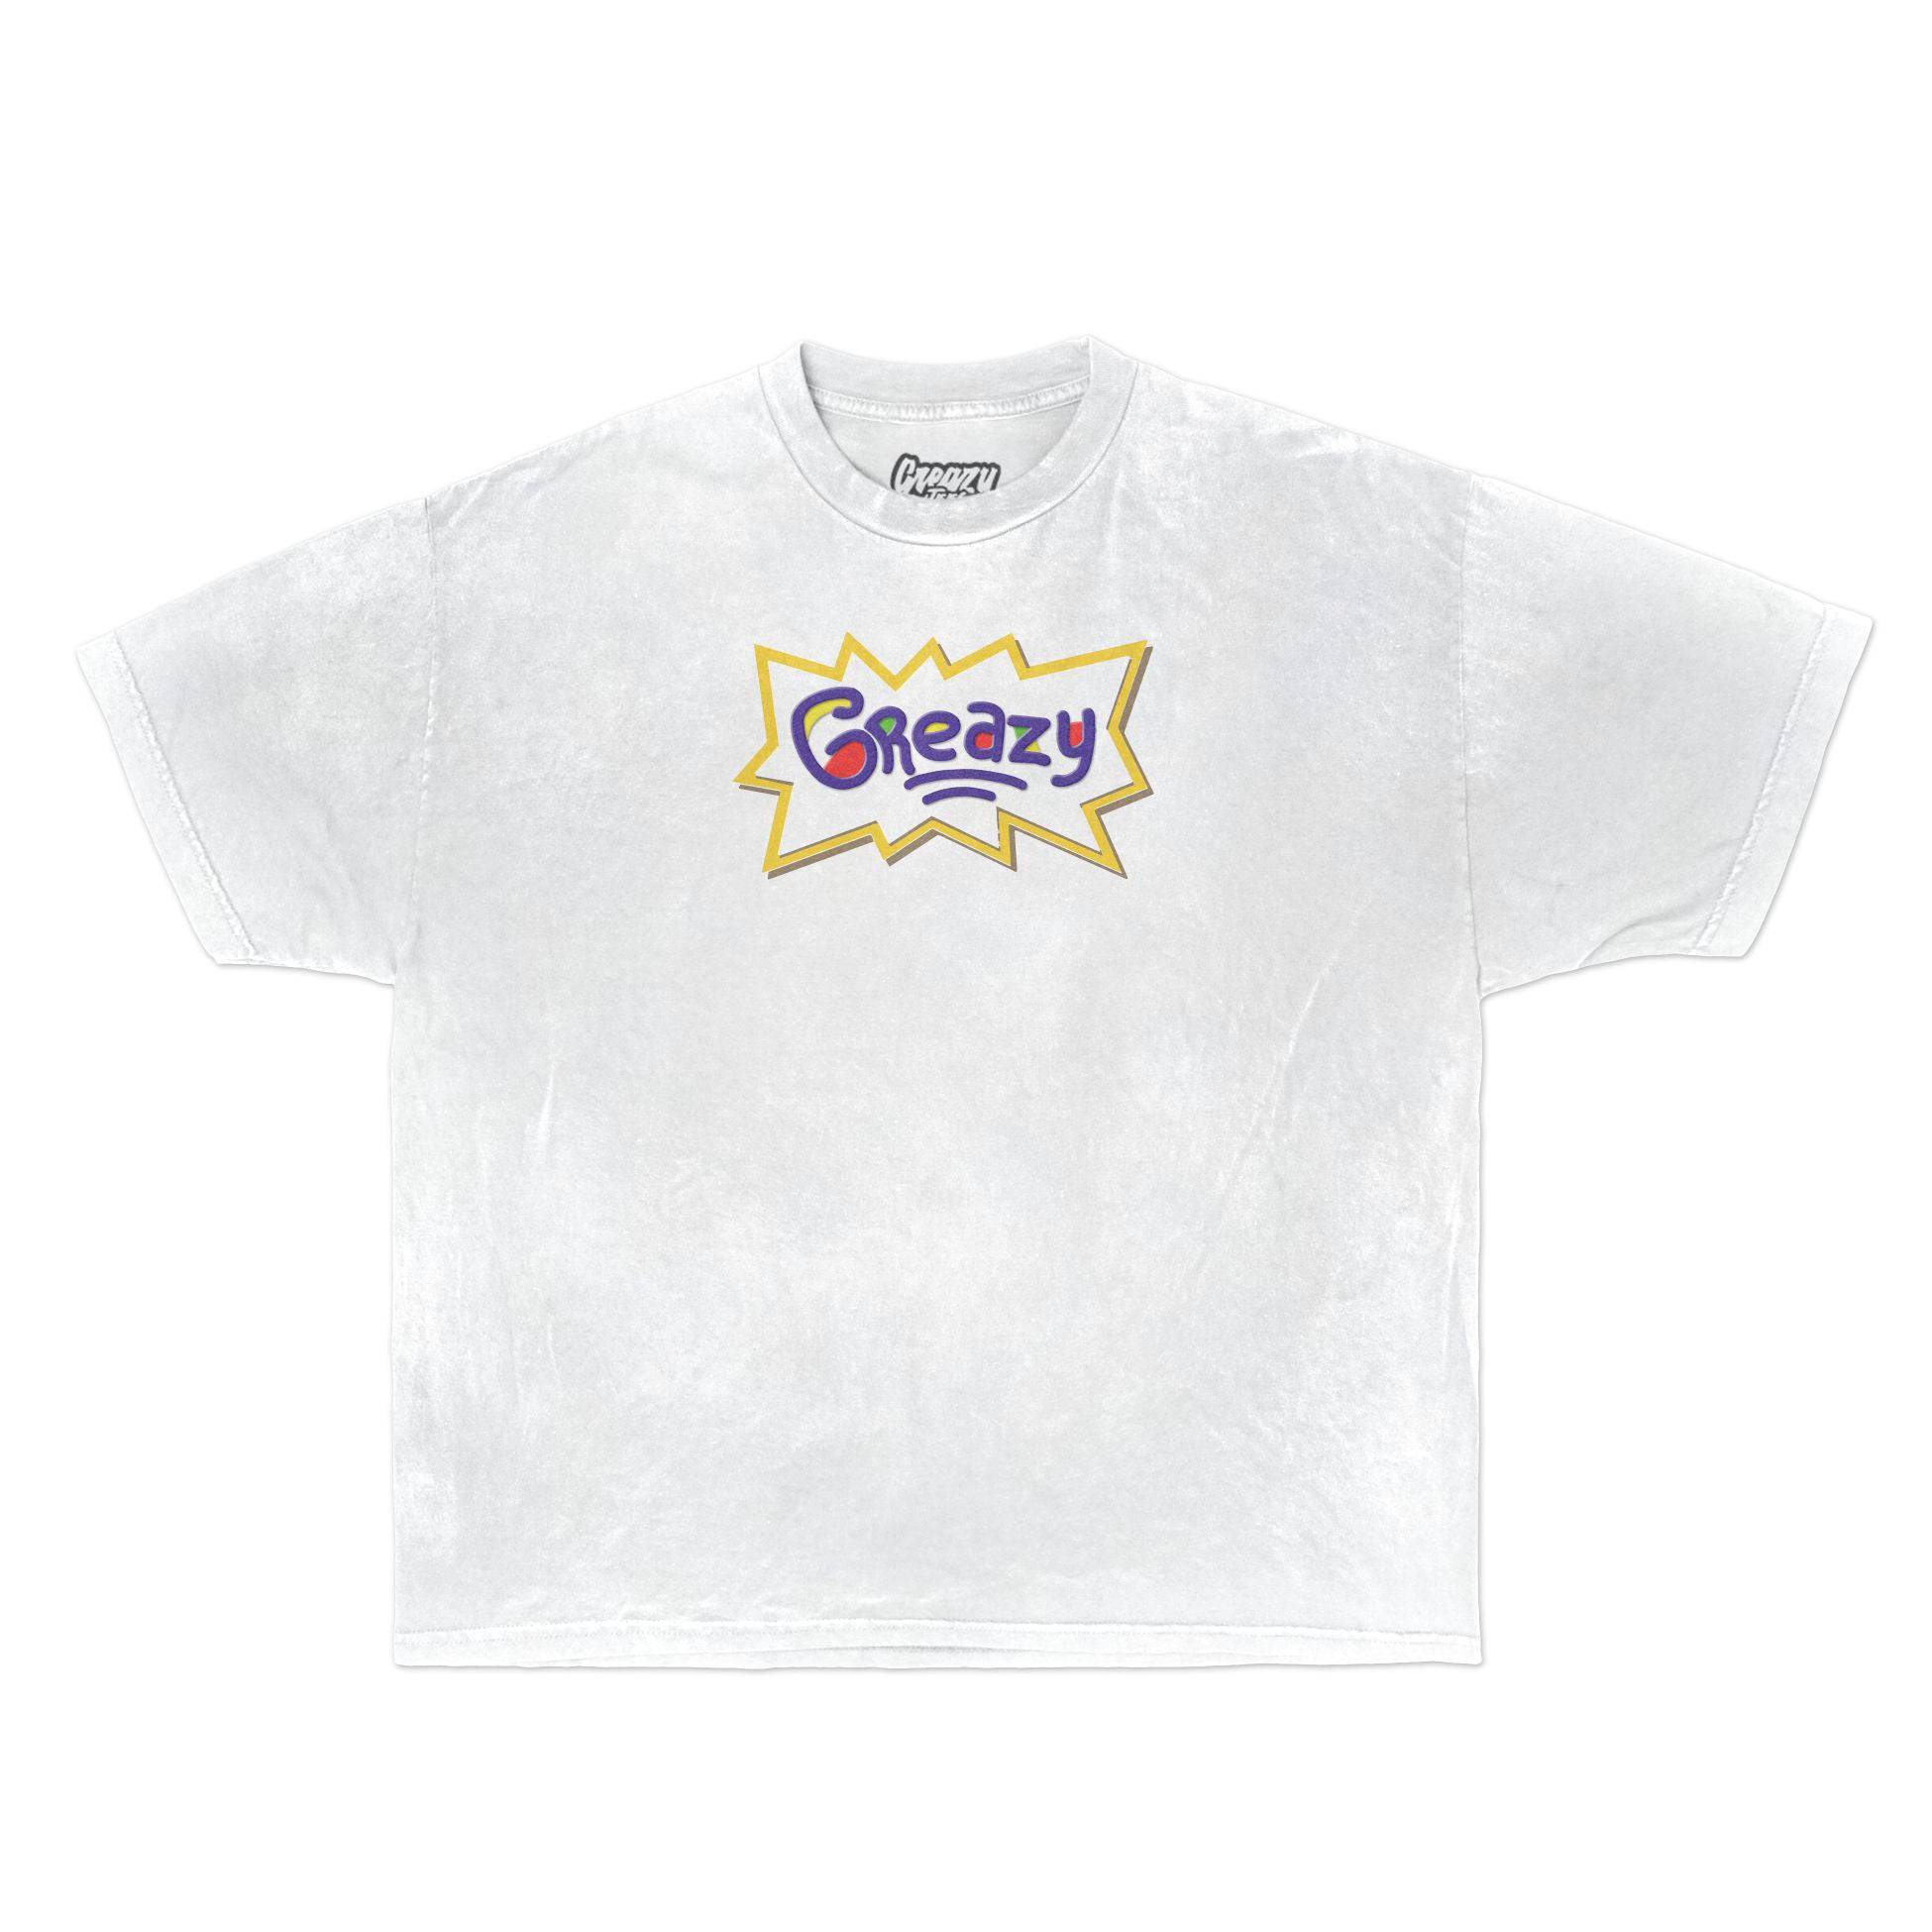 Childs Play Tee Tee Greazy Tees XS White Oversized